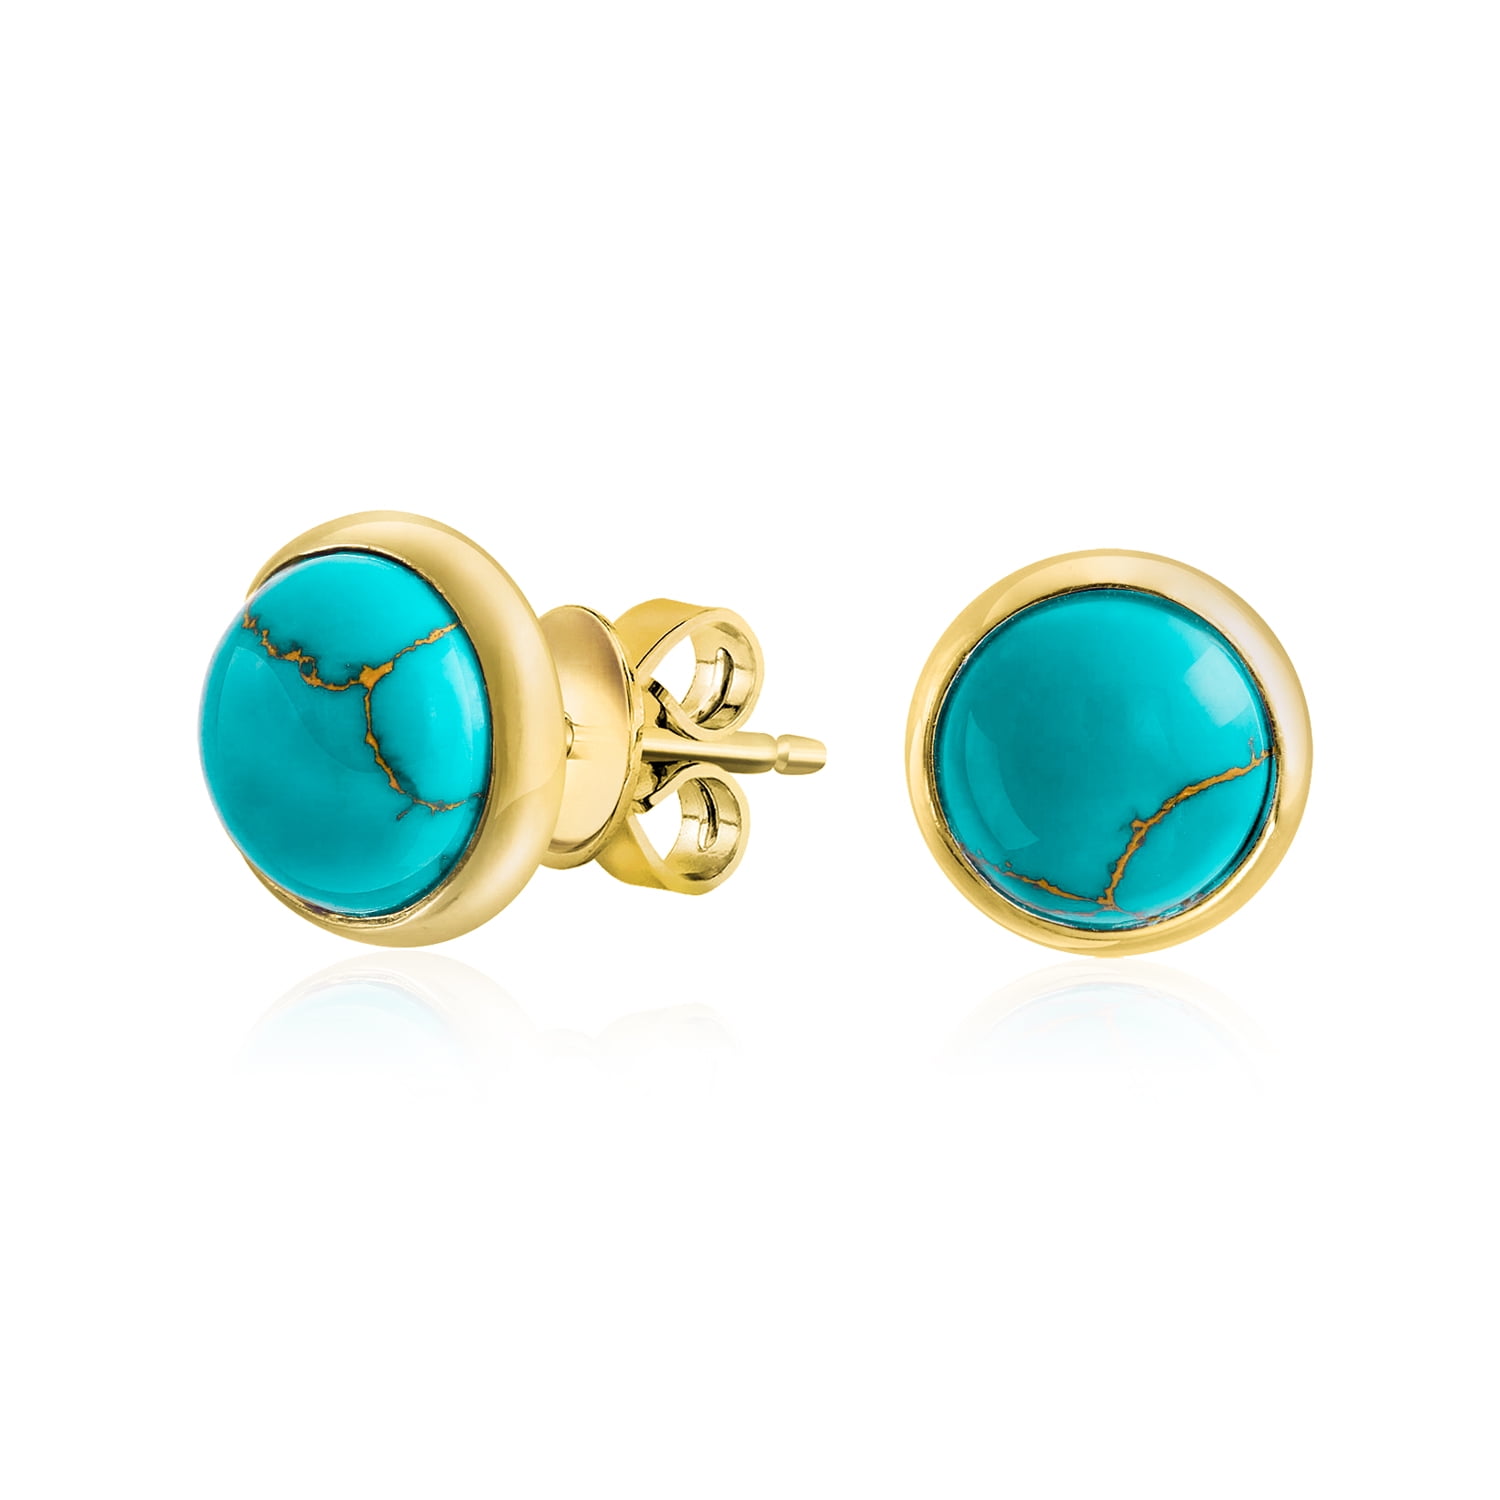 14k Yellow Gold White Gold or Sterling Silver Simulated Blue Turquoise Ball Stud Earrings 